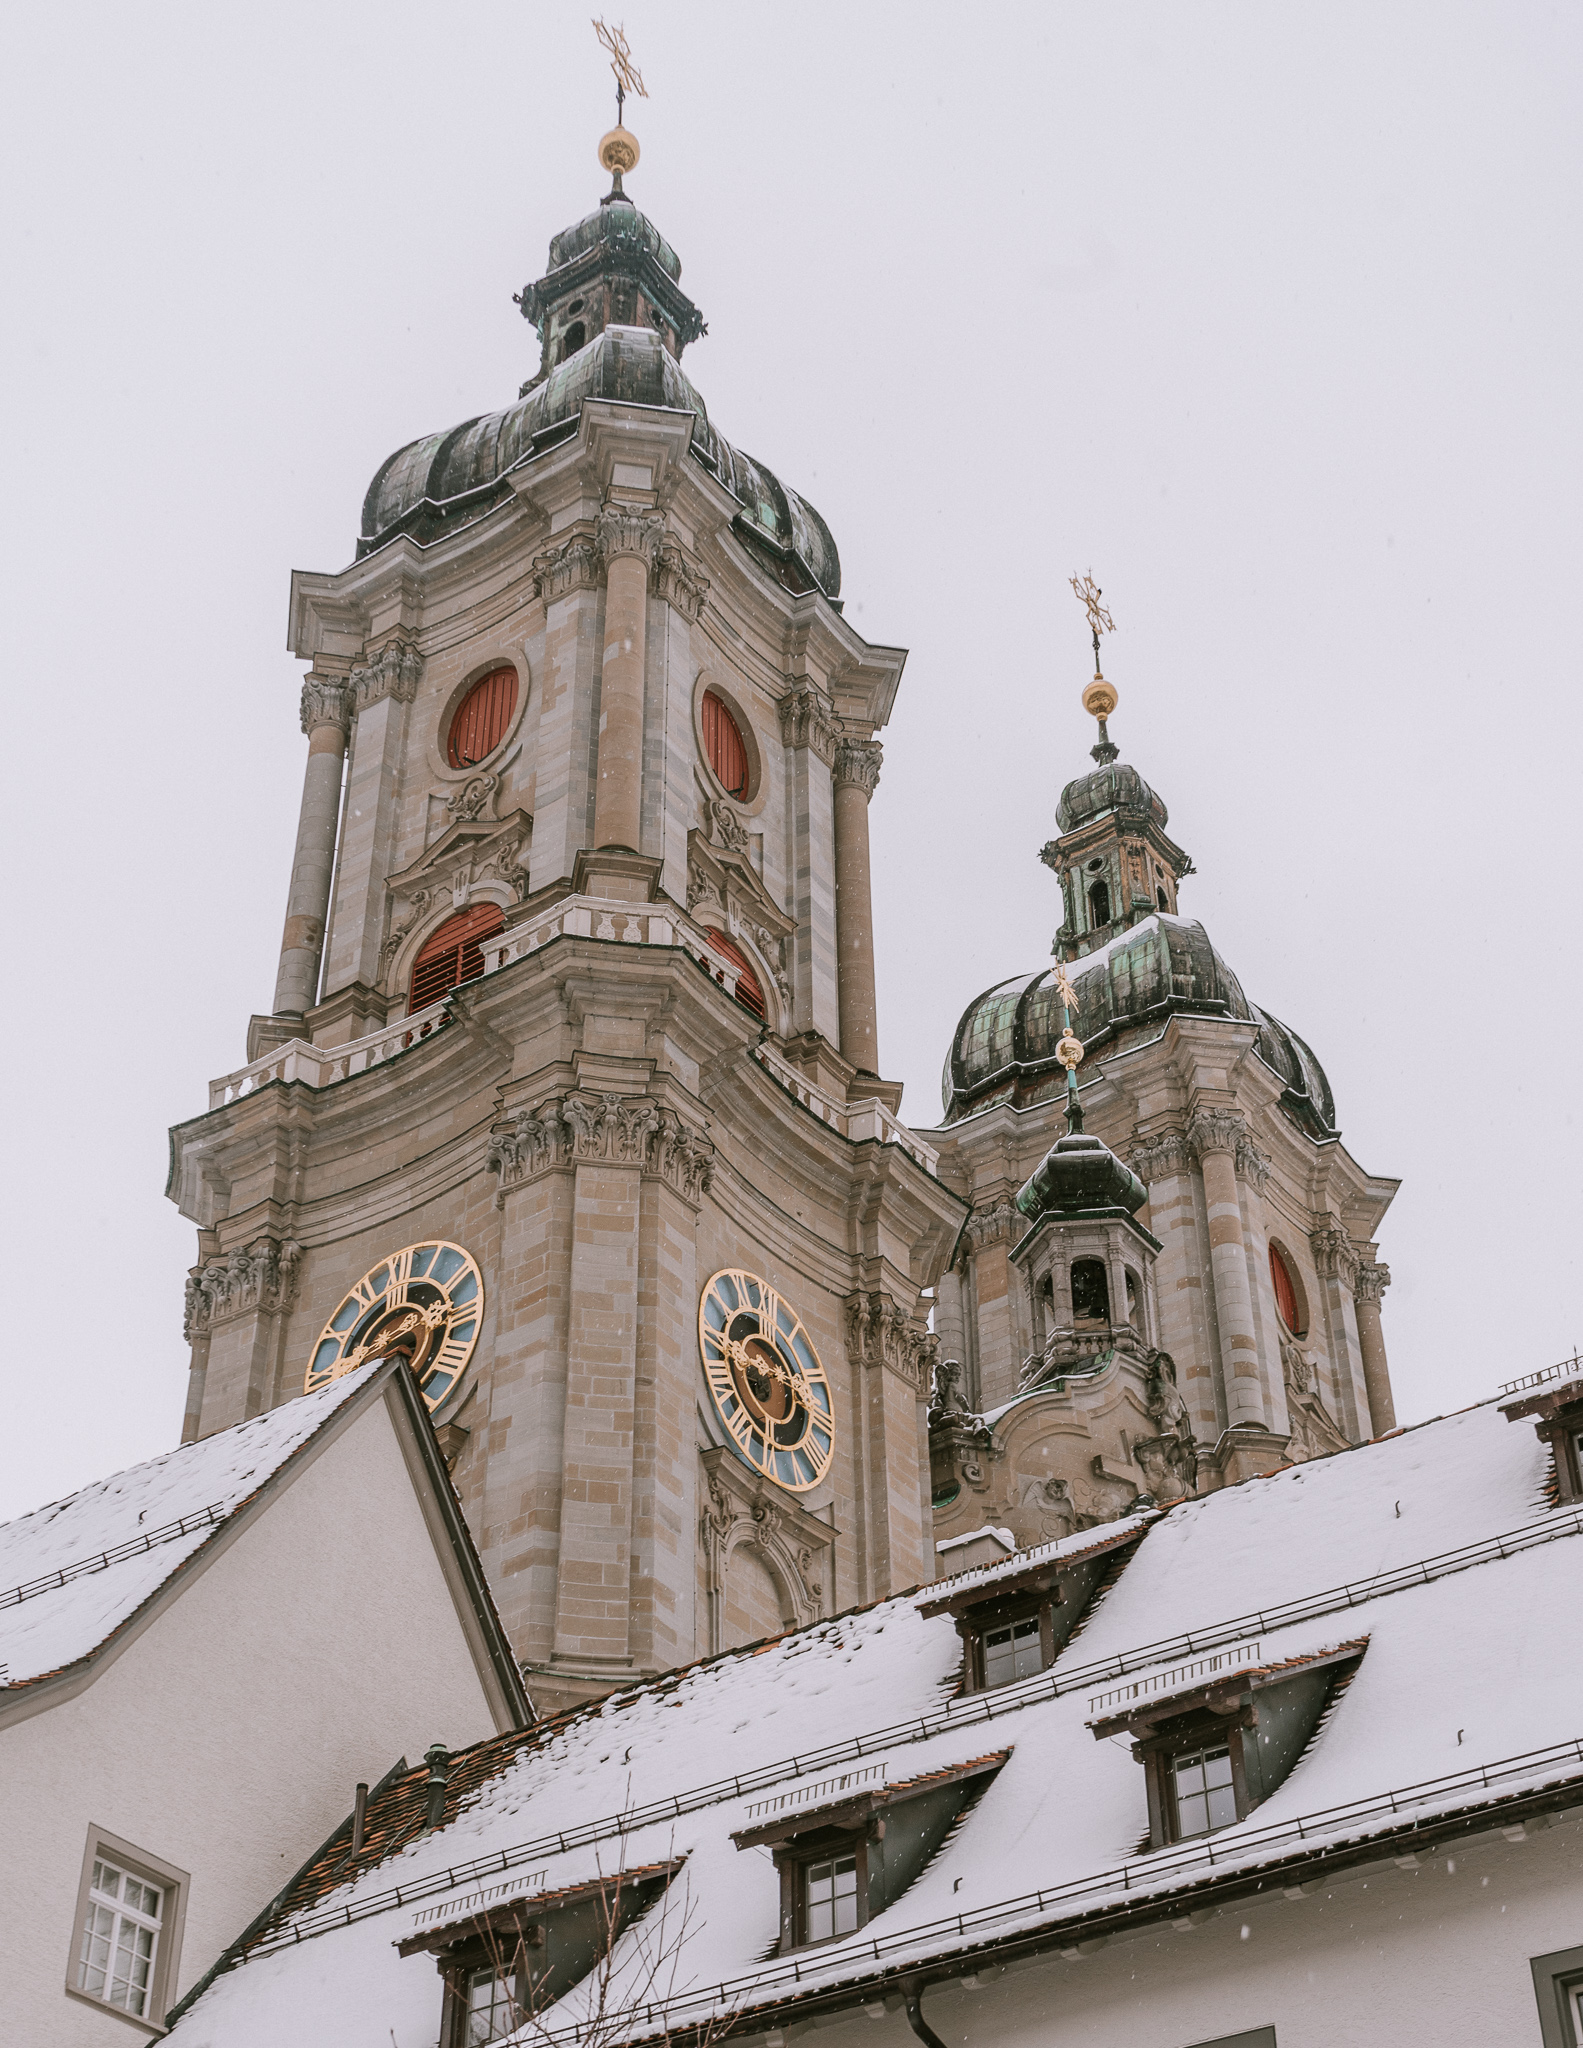 A view of the clocks and towers of St. Gallen Cathedral in winter